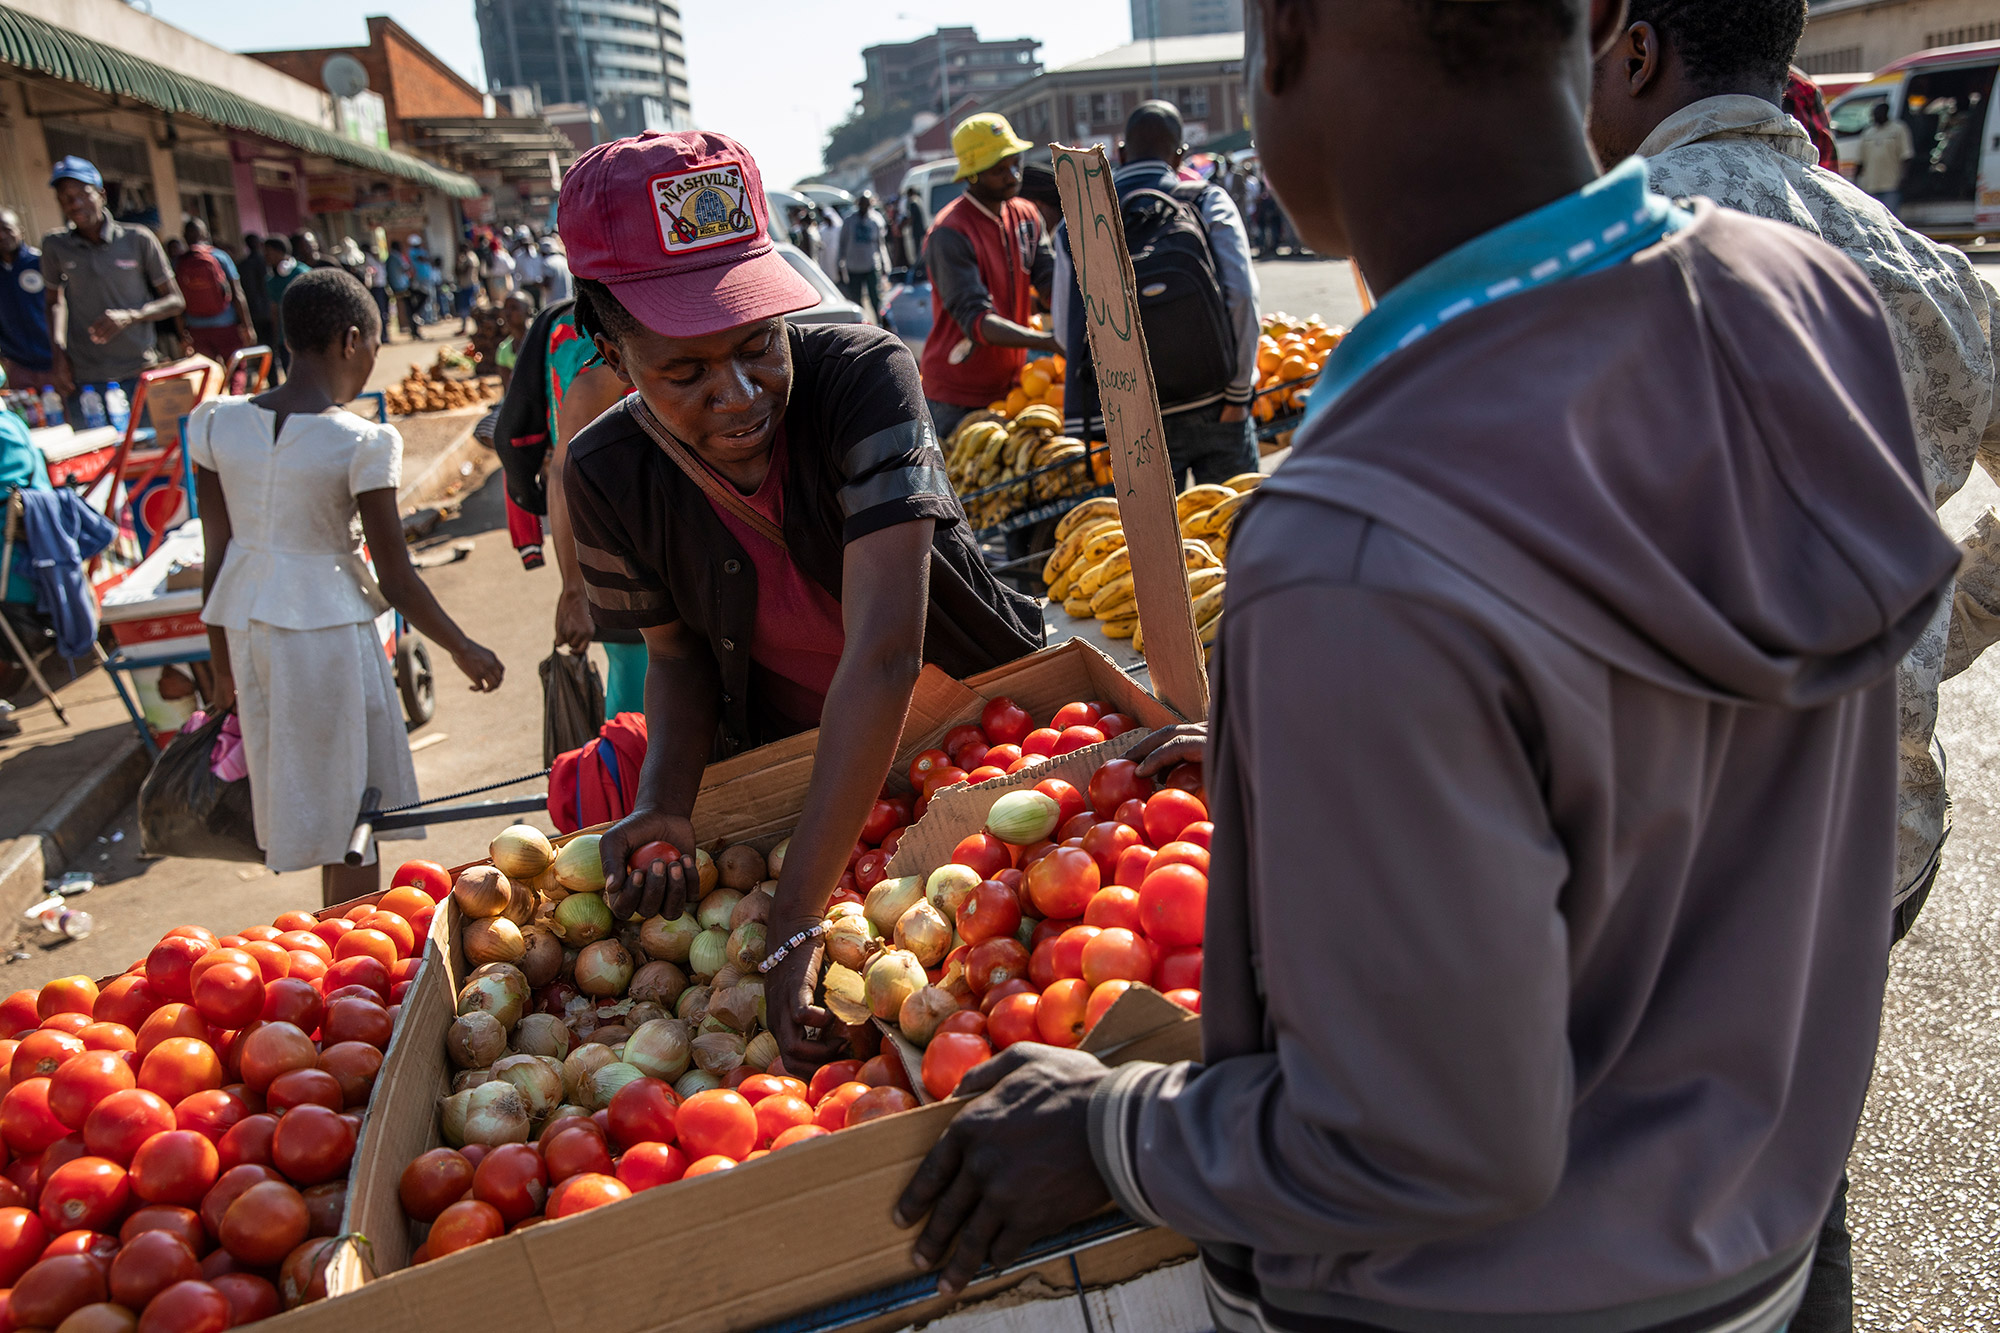 Street vendors sell goods in a market&nbsp;in Harare, Zimbabwe.